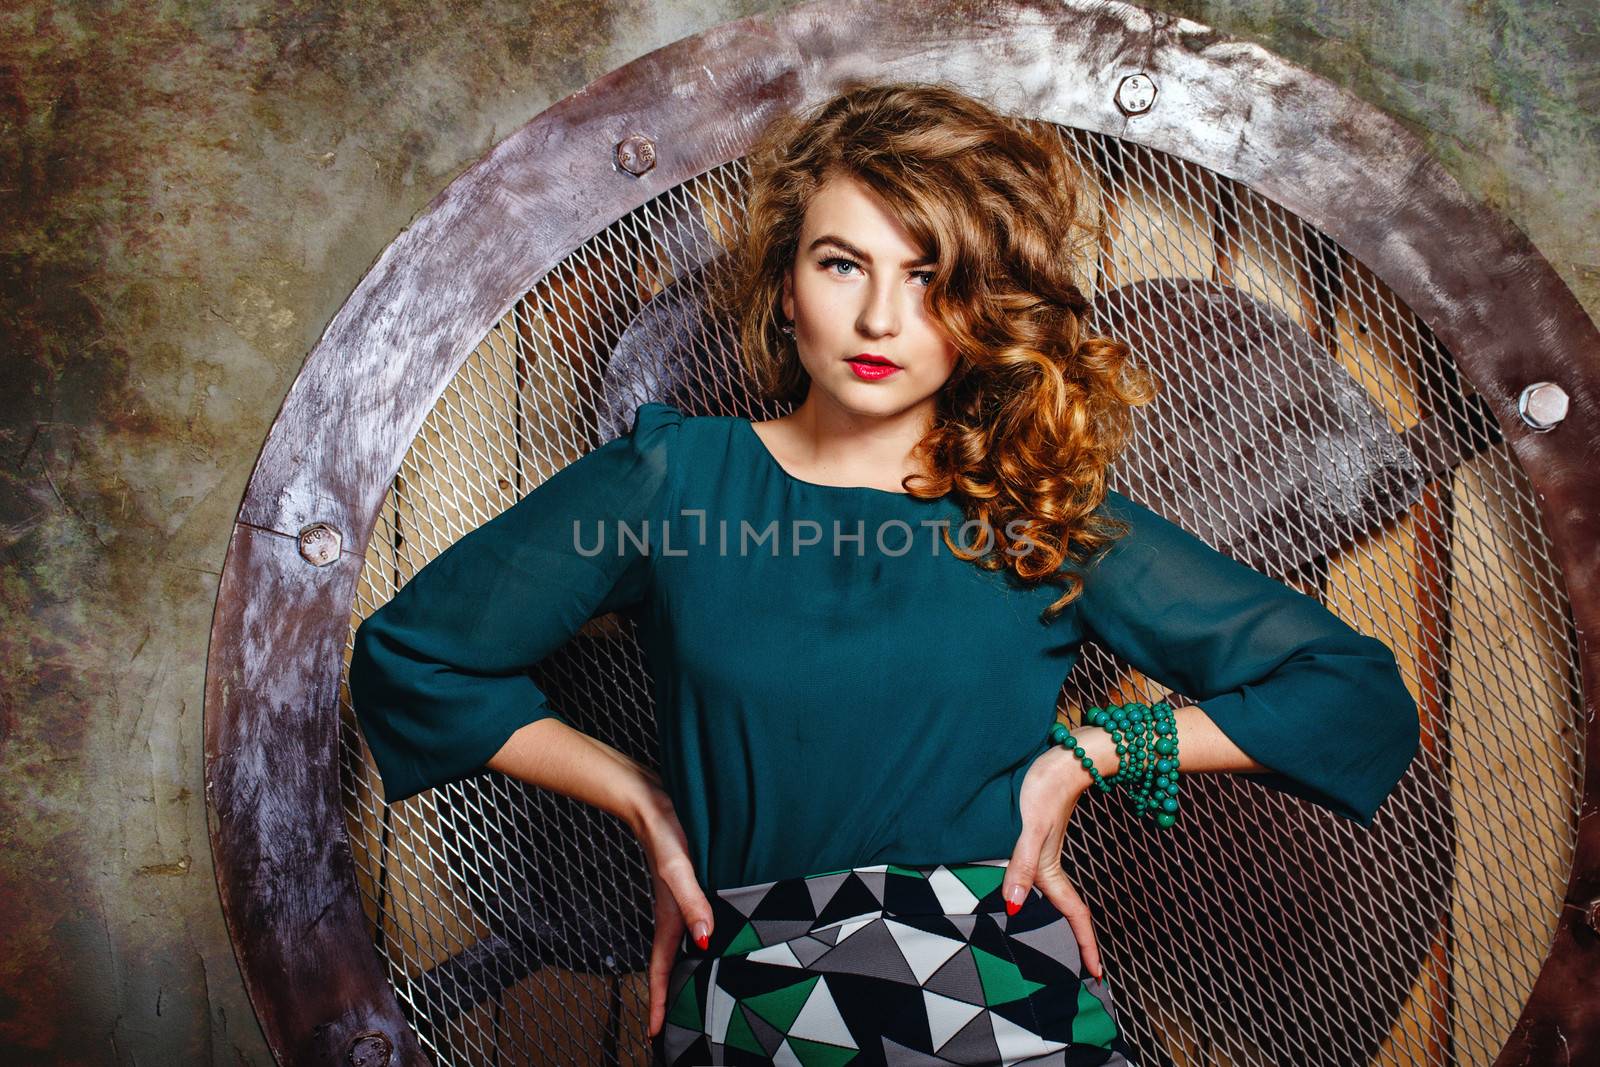 Attractive young girl model with curly hair on background of large fan